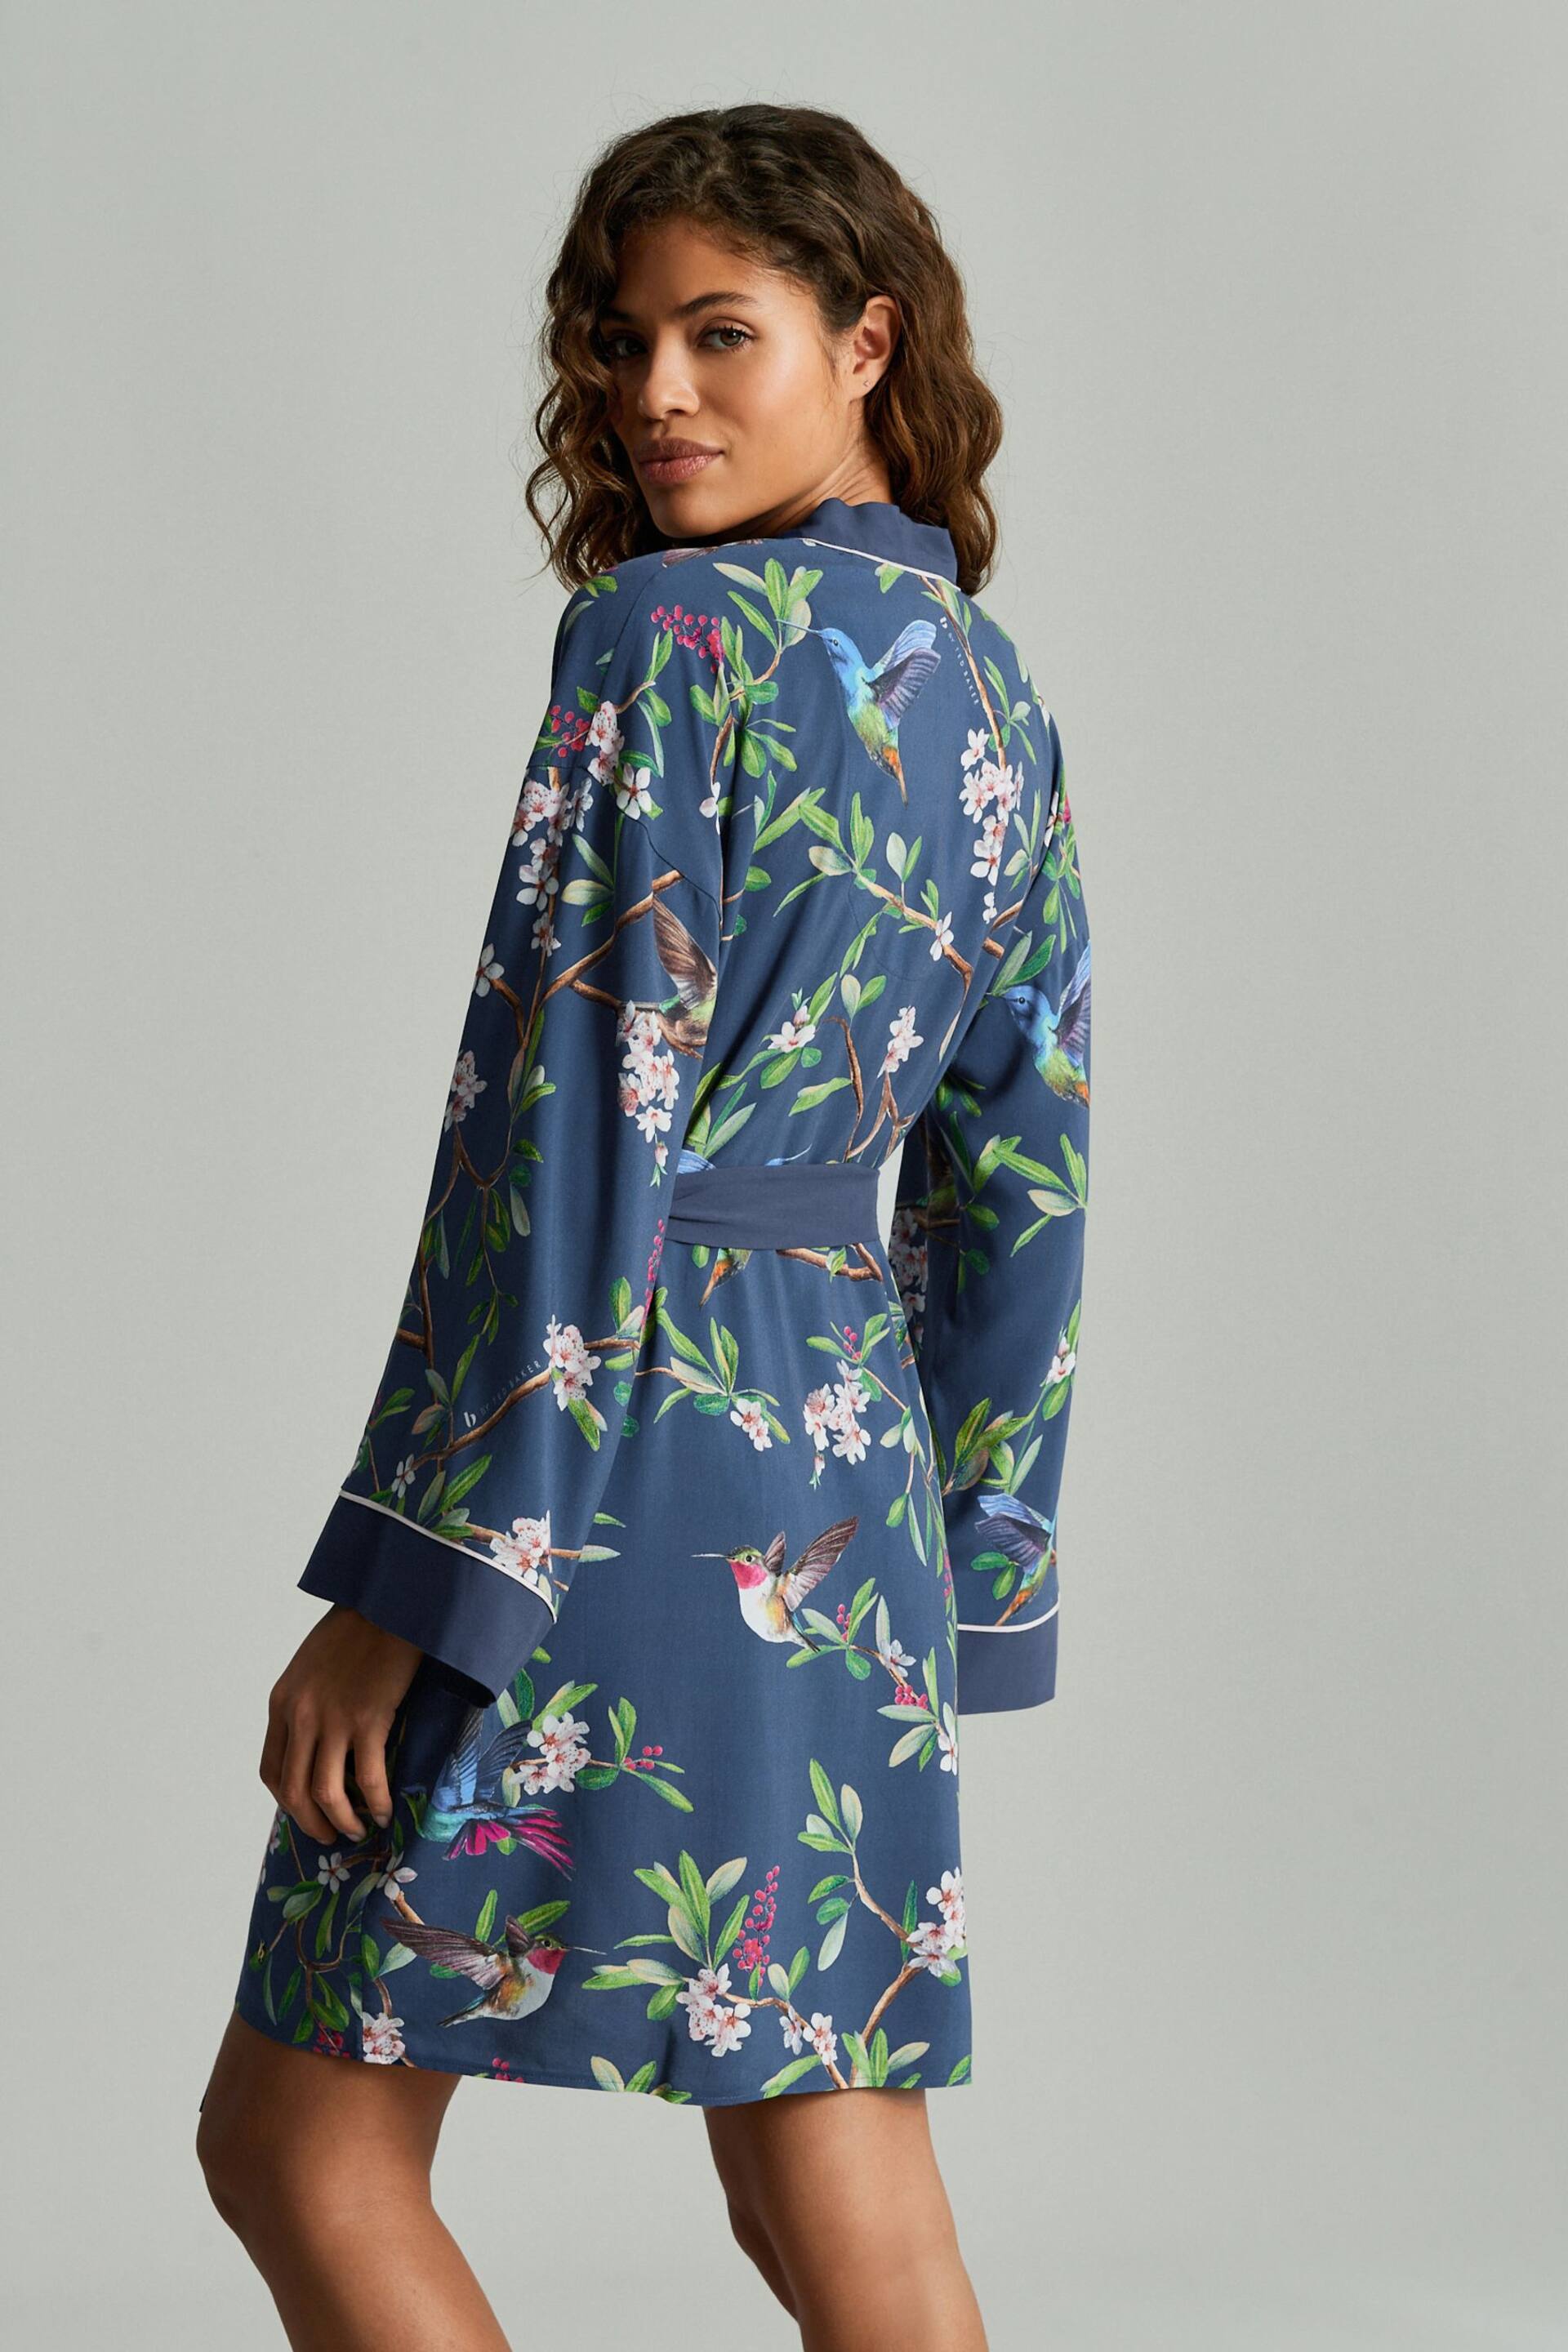 B by Ted Baker Charcoal Navy Bird Viscose Robe - Image 6 of 12